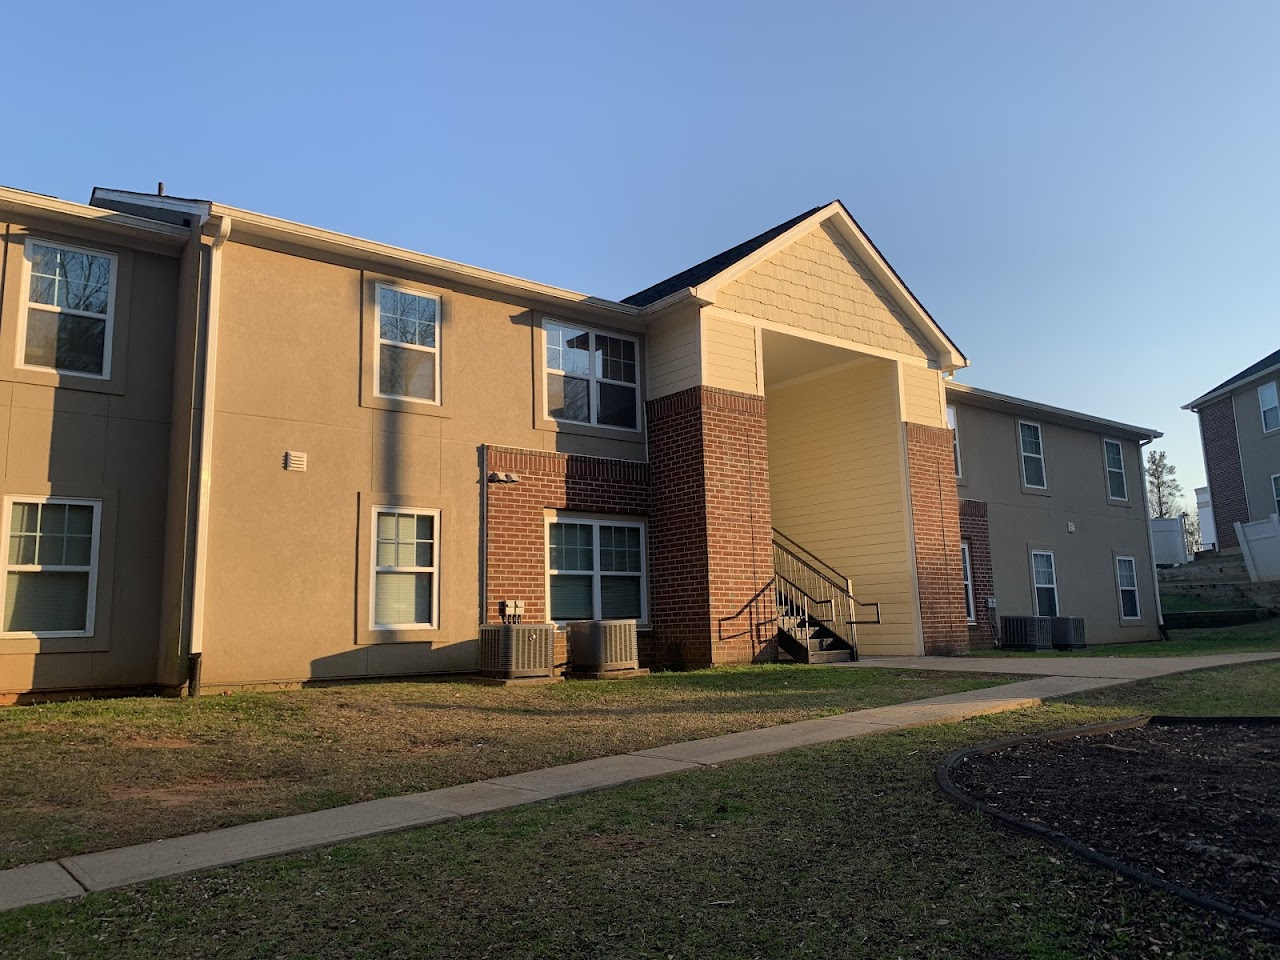 Photo of DEERWOOD APARTMENTS (FKA WINNSBORO APARTMENTS). Affordable housing located at 647 US HIGHWAY 321 BYPASS WINNSBORO, SC 29180